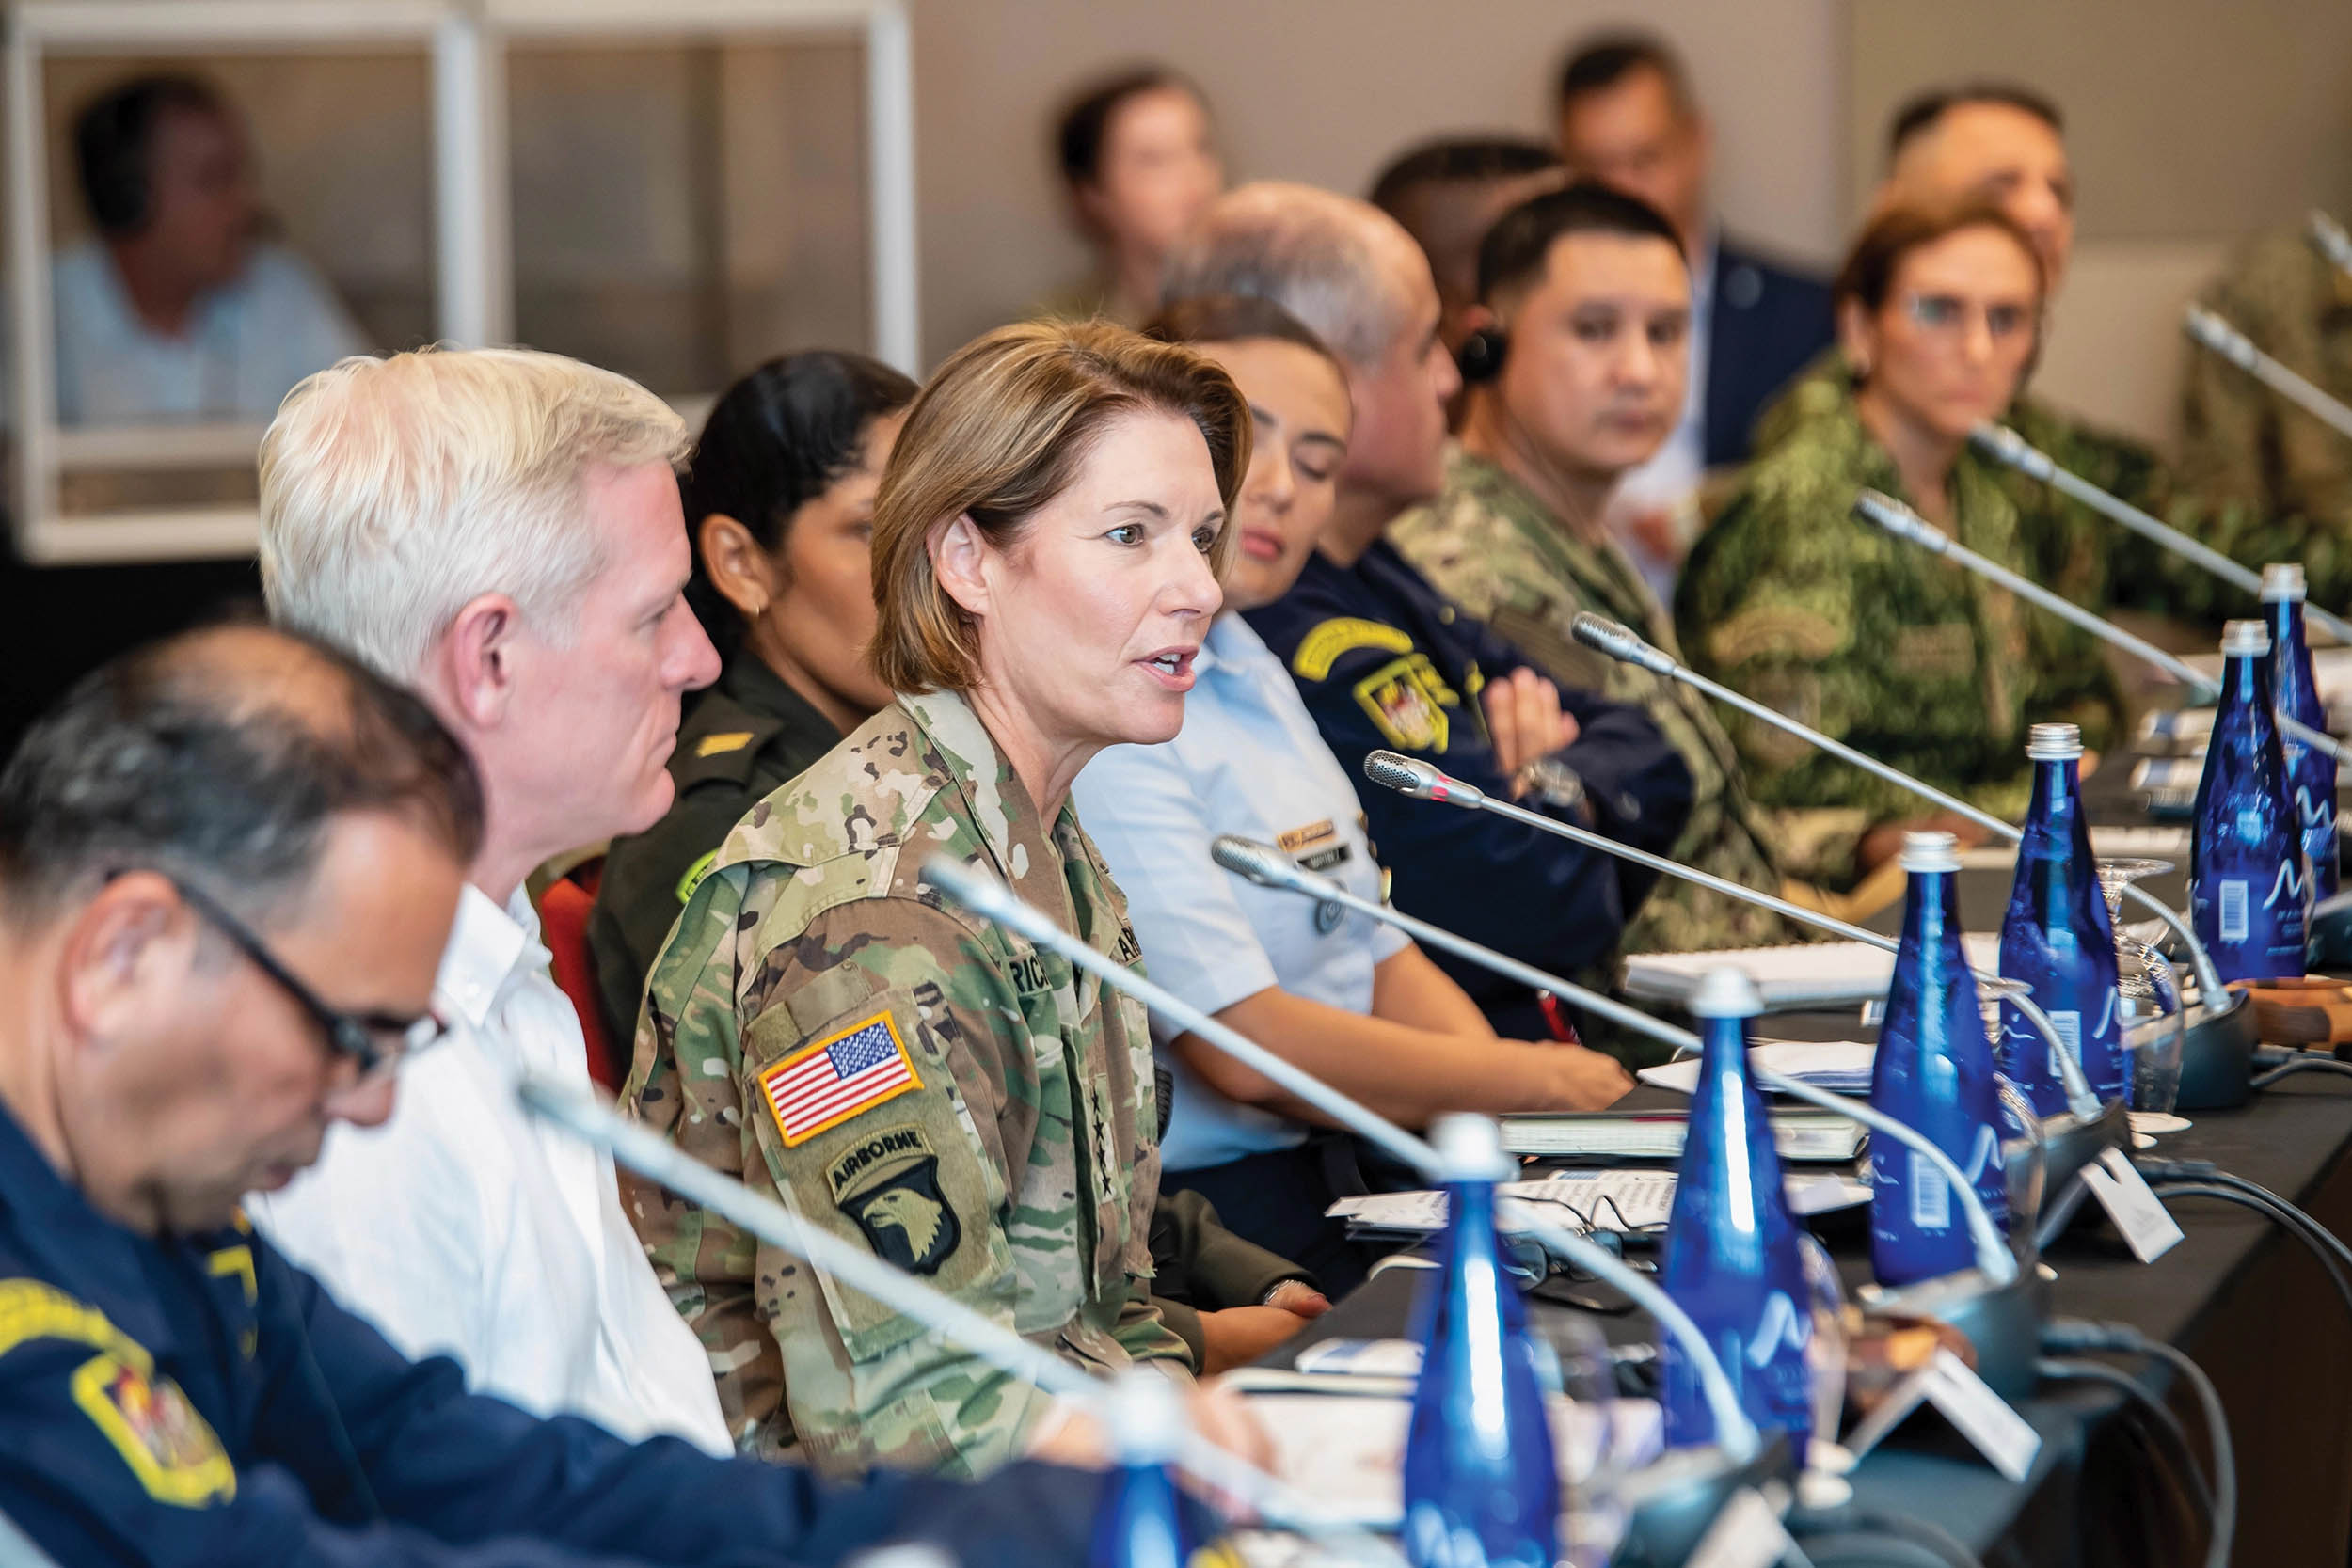 General Laura J. Richardson, commander of U.S. Southern Command, delivers remarks at Women, Peace, and Security roundtable as part of Continuing Promise 2022, in Cartagena, Colombia, November 13, 2022 (U.S. Navy/Sophia Simons)